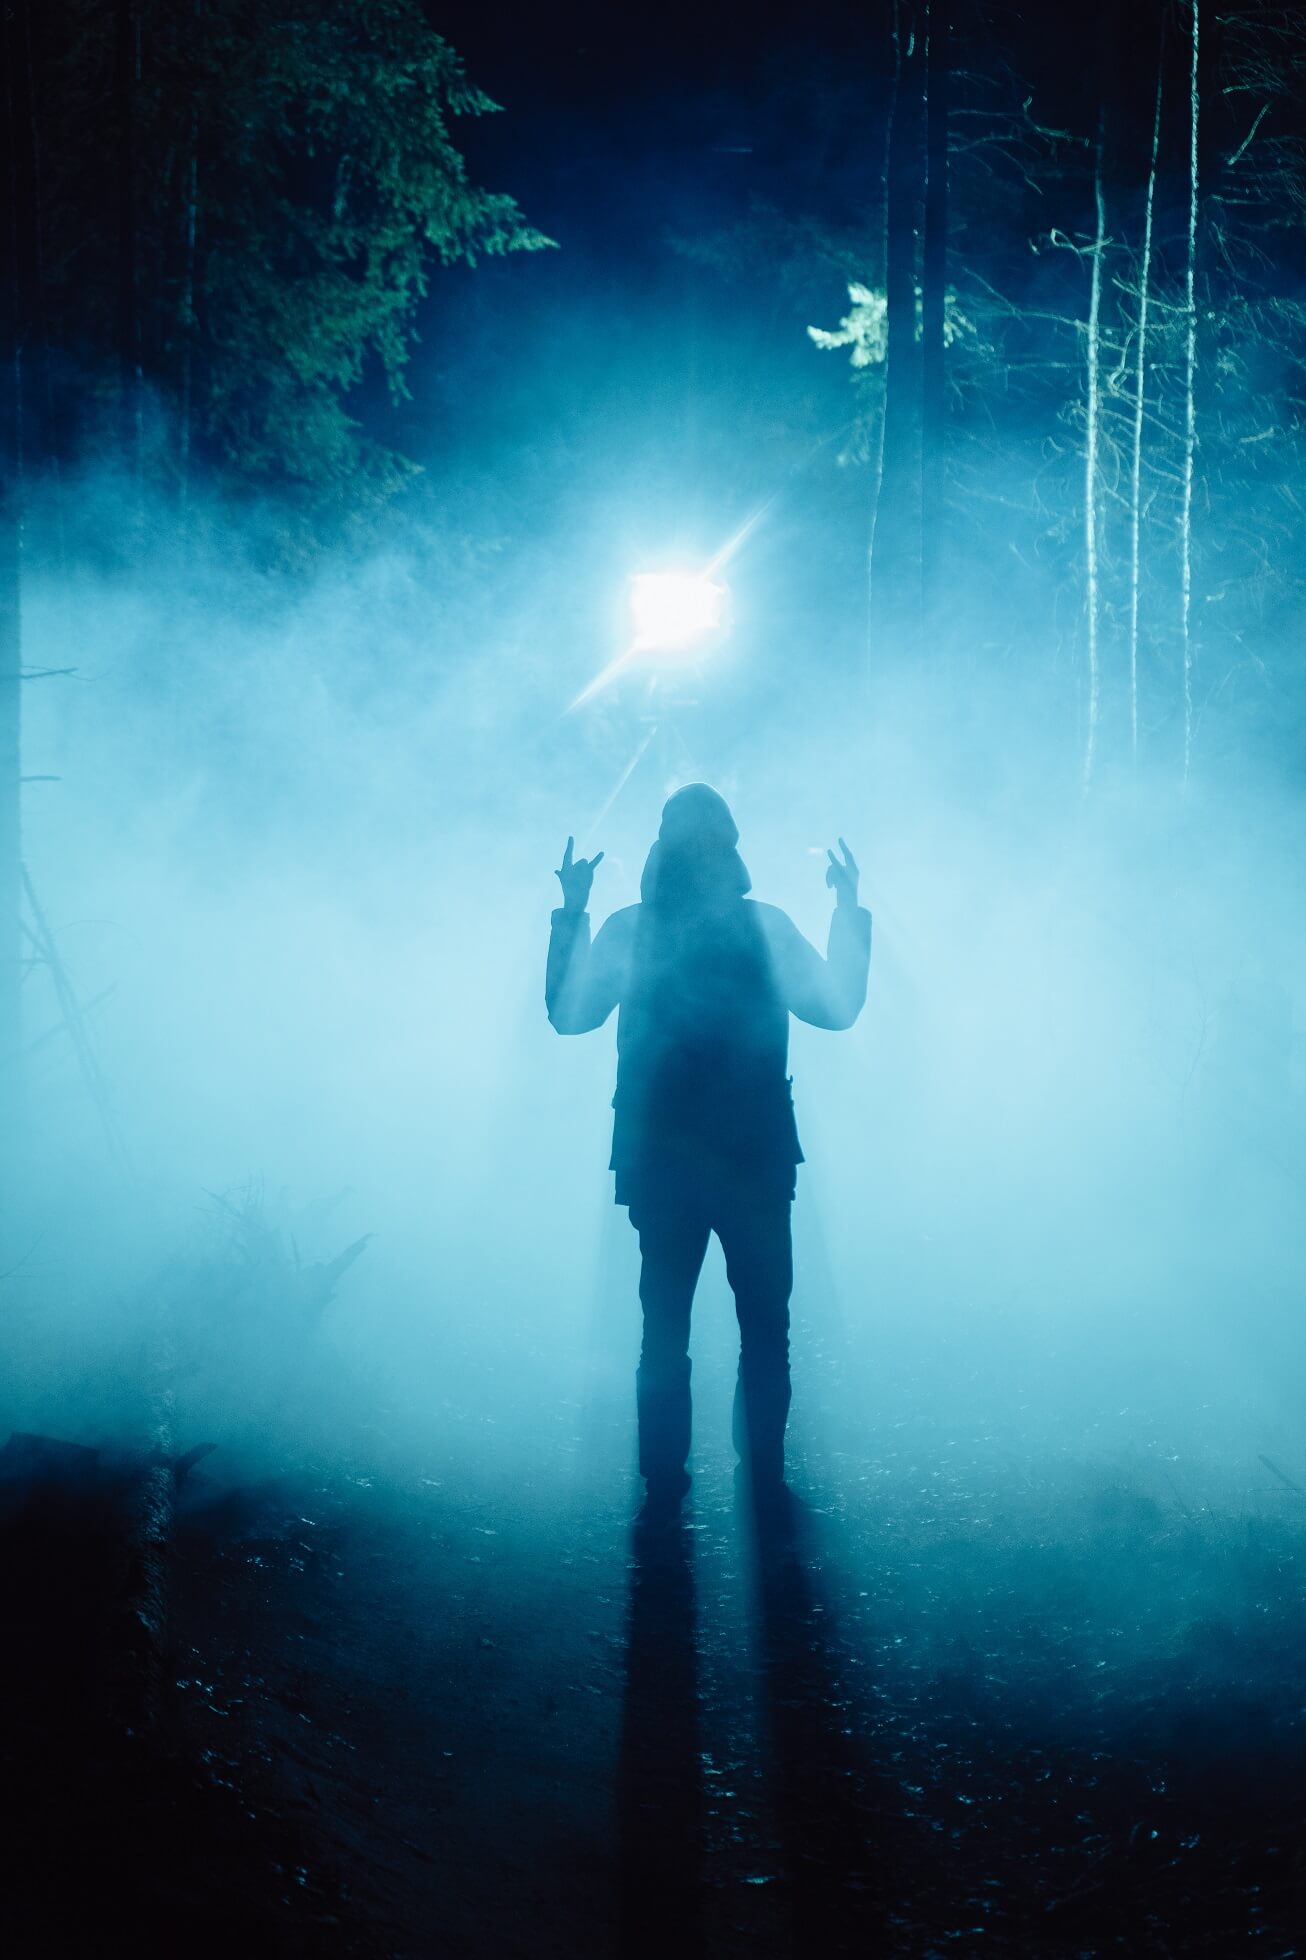 Silhouette of a man showing the Rock On gesture in a dark forest with blue lights in the background